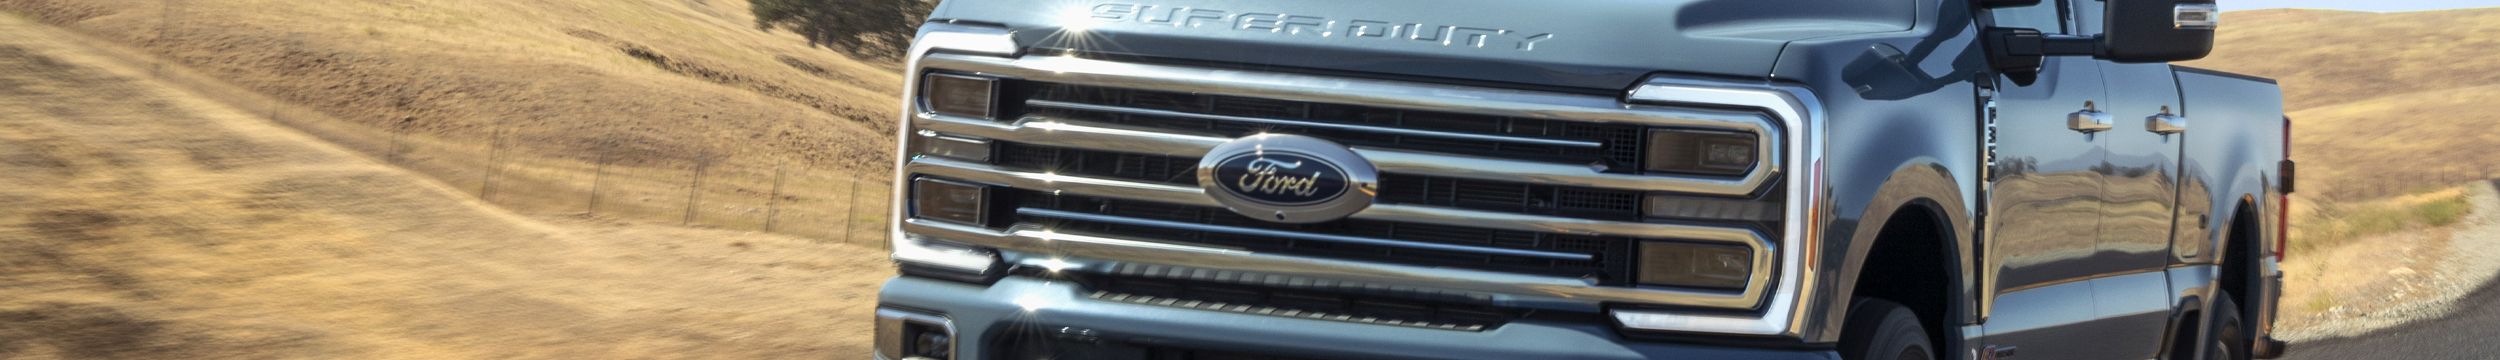 Ford page header image